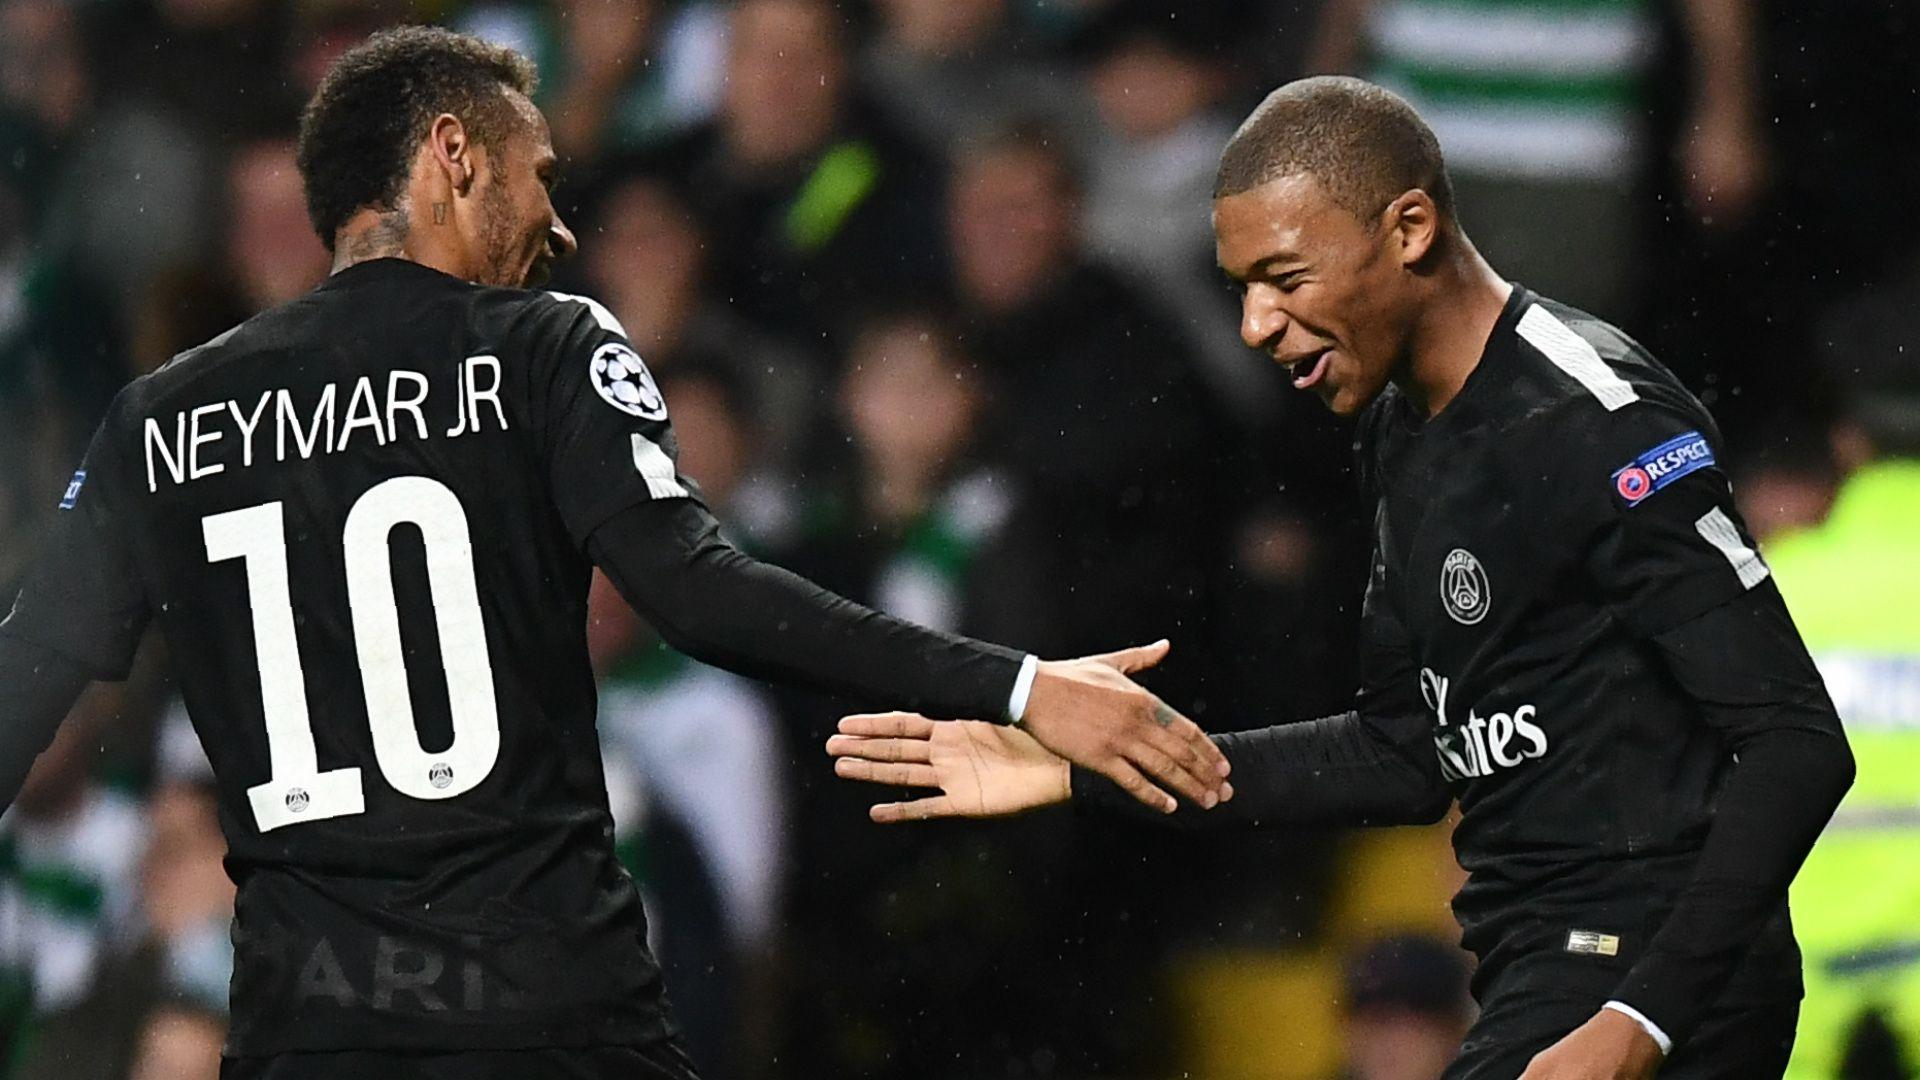 Neymar and Mbappe's 'incredible' understanding at PSG hailed